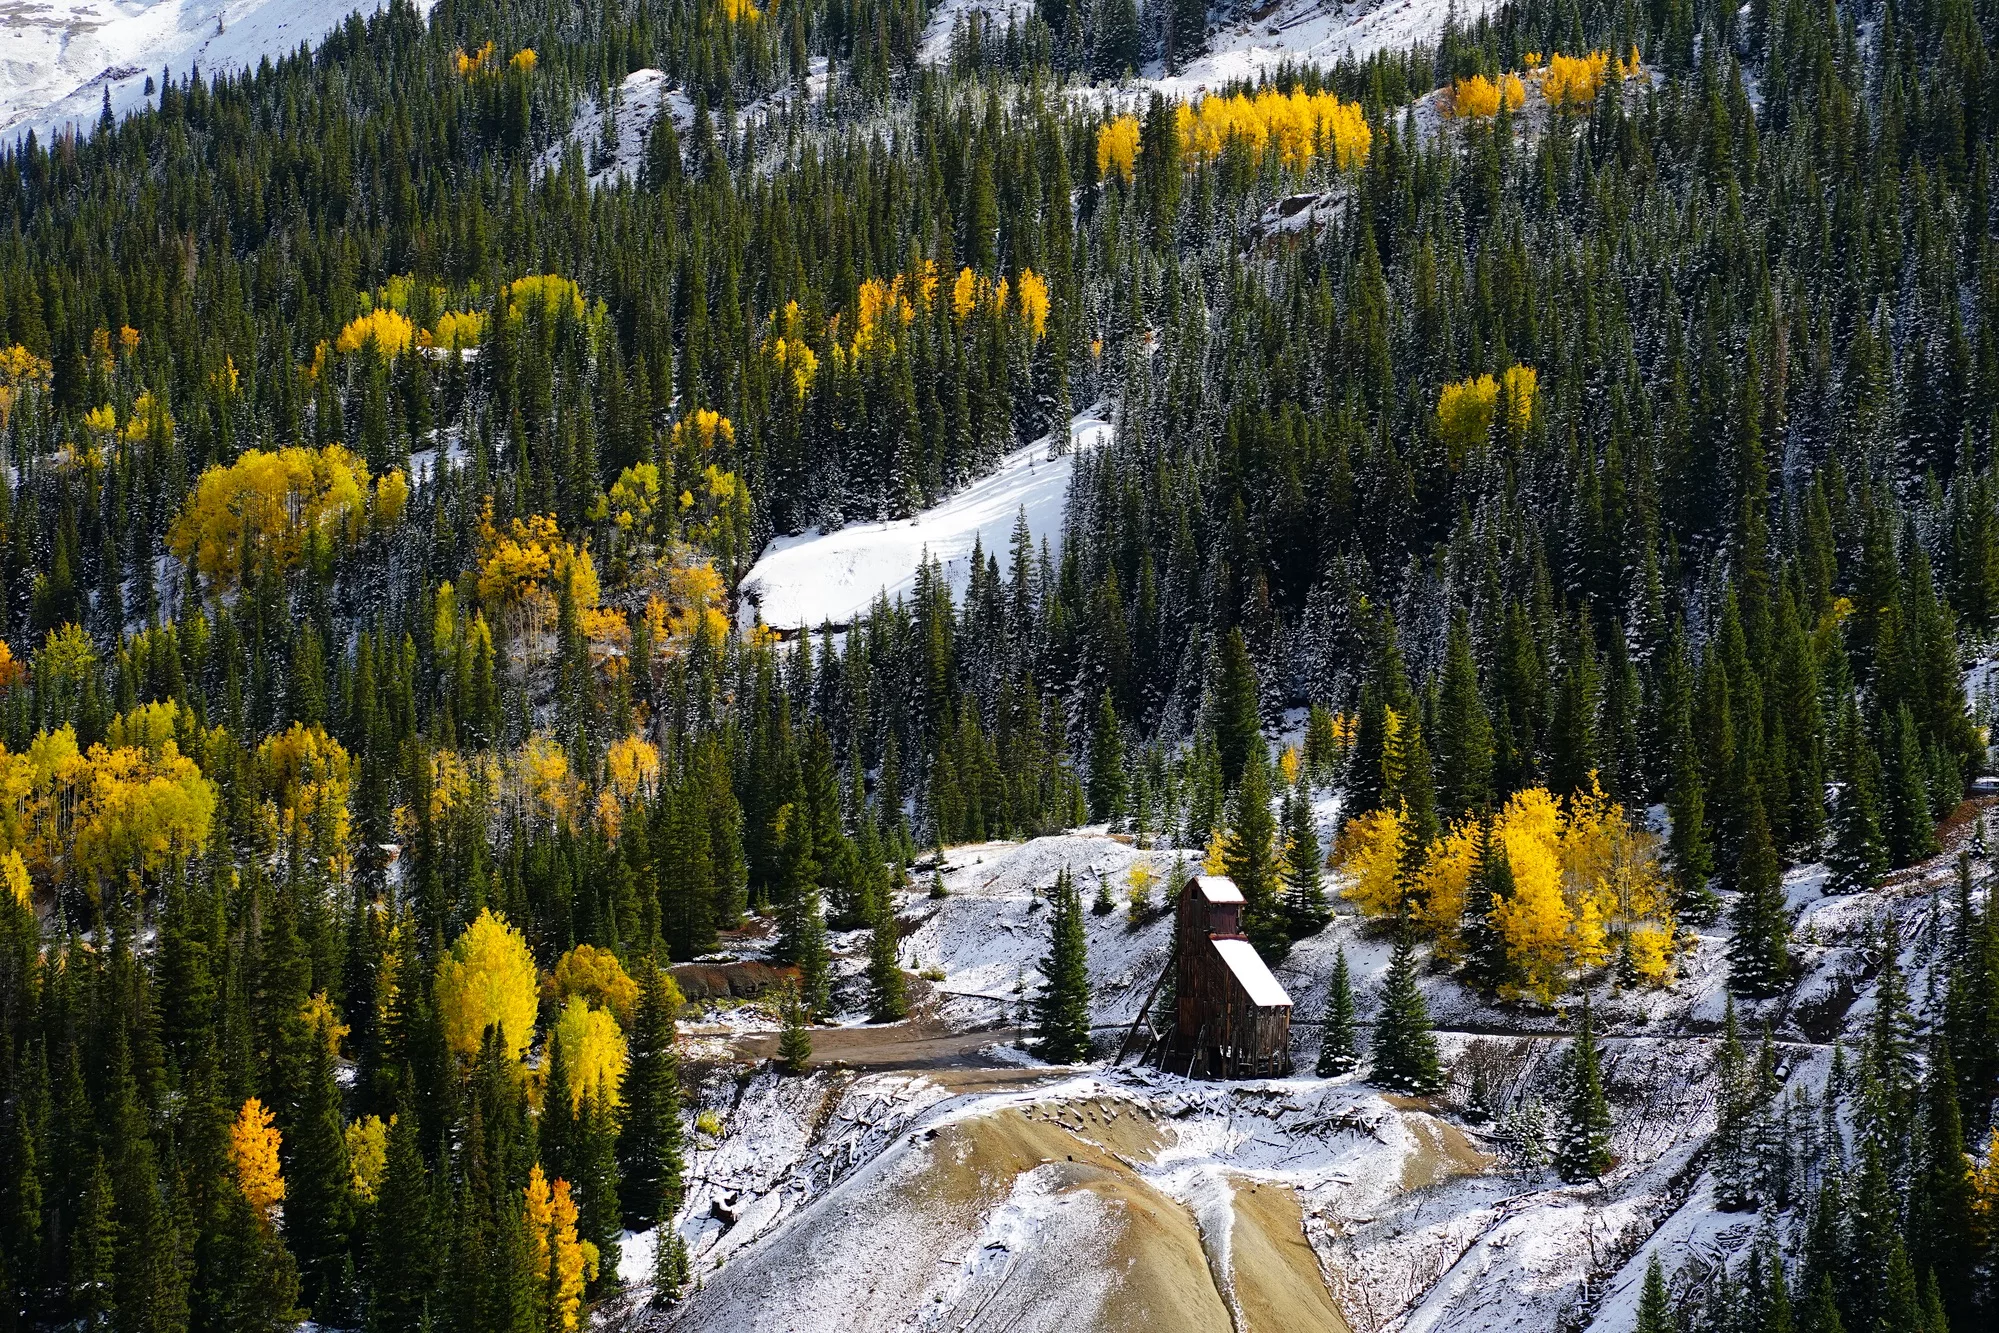 Don Mammoser Colorado Guided Photography Tour snowy mountains and Aspen trees